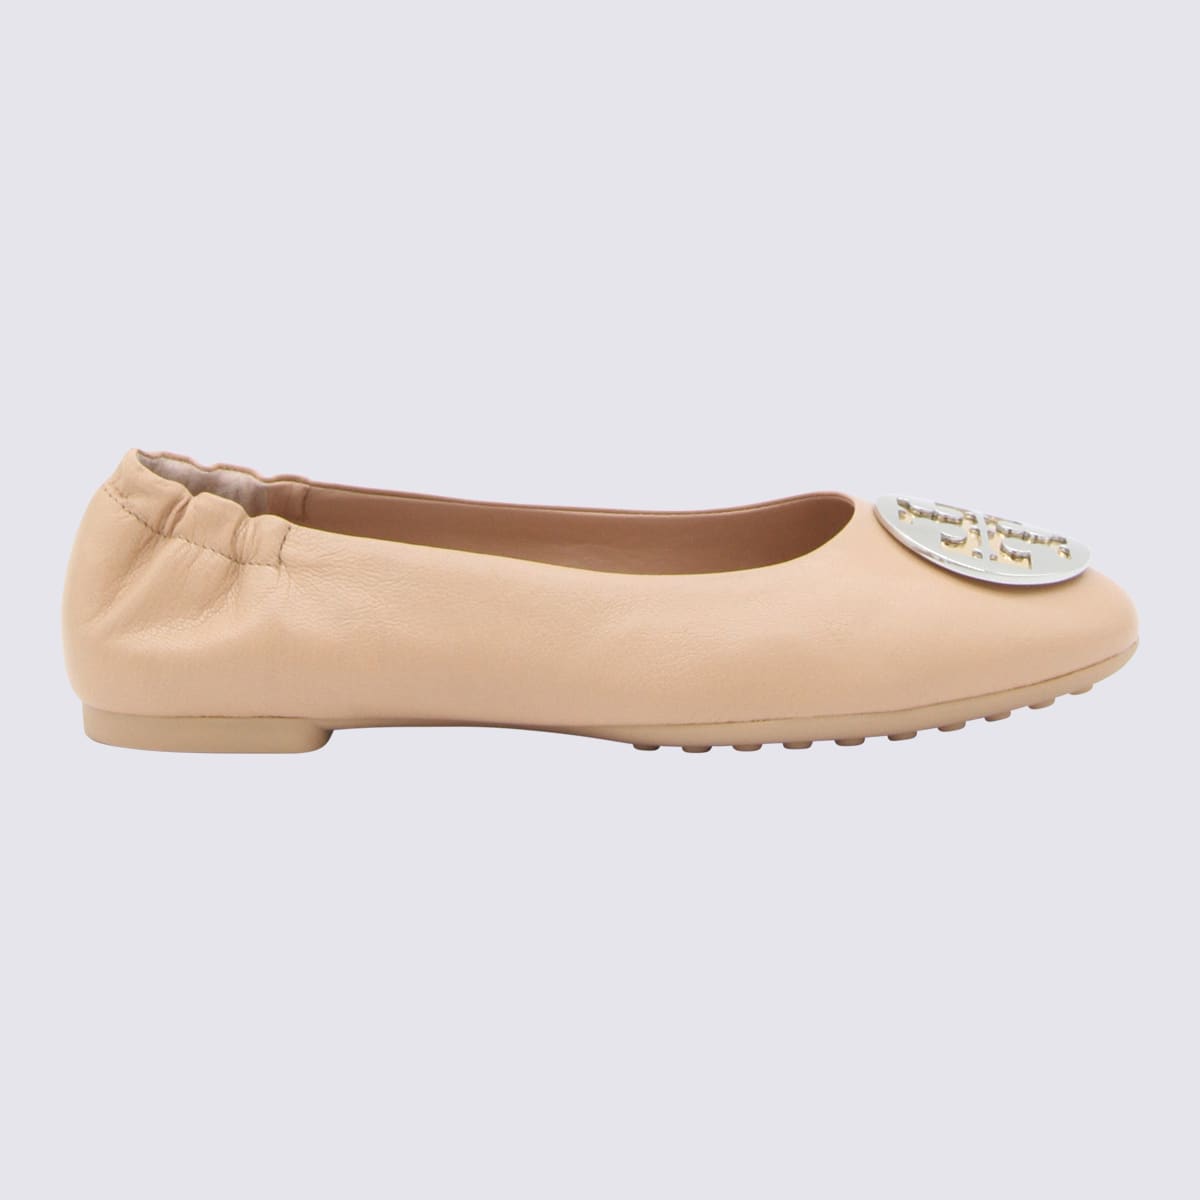 Shop Tory Burch Light Sand Leather Claire Flats